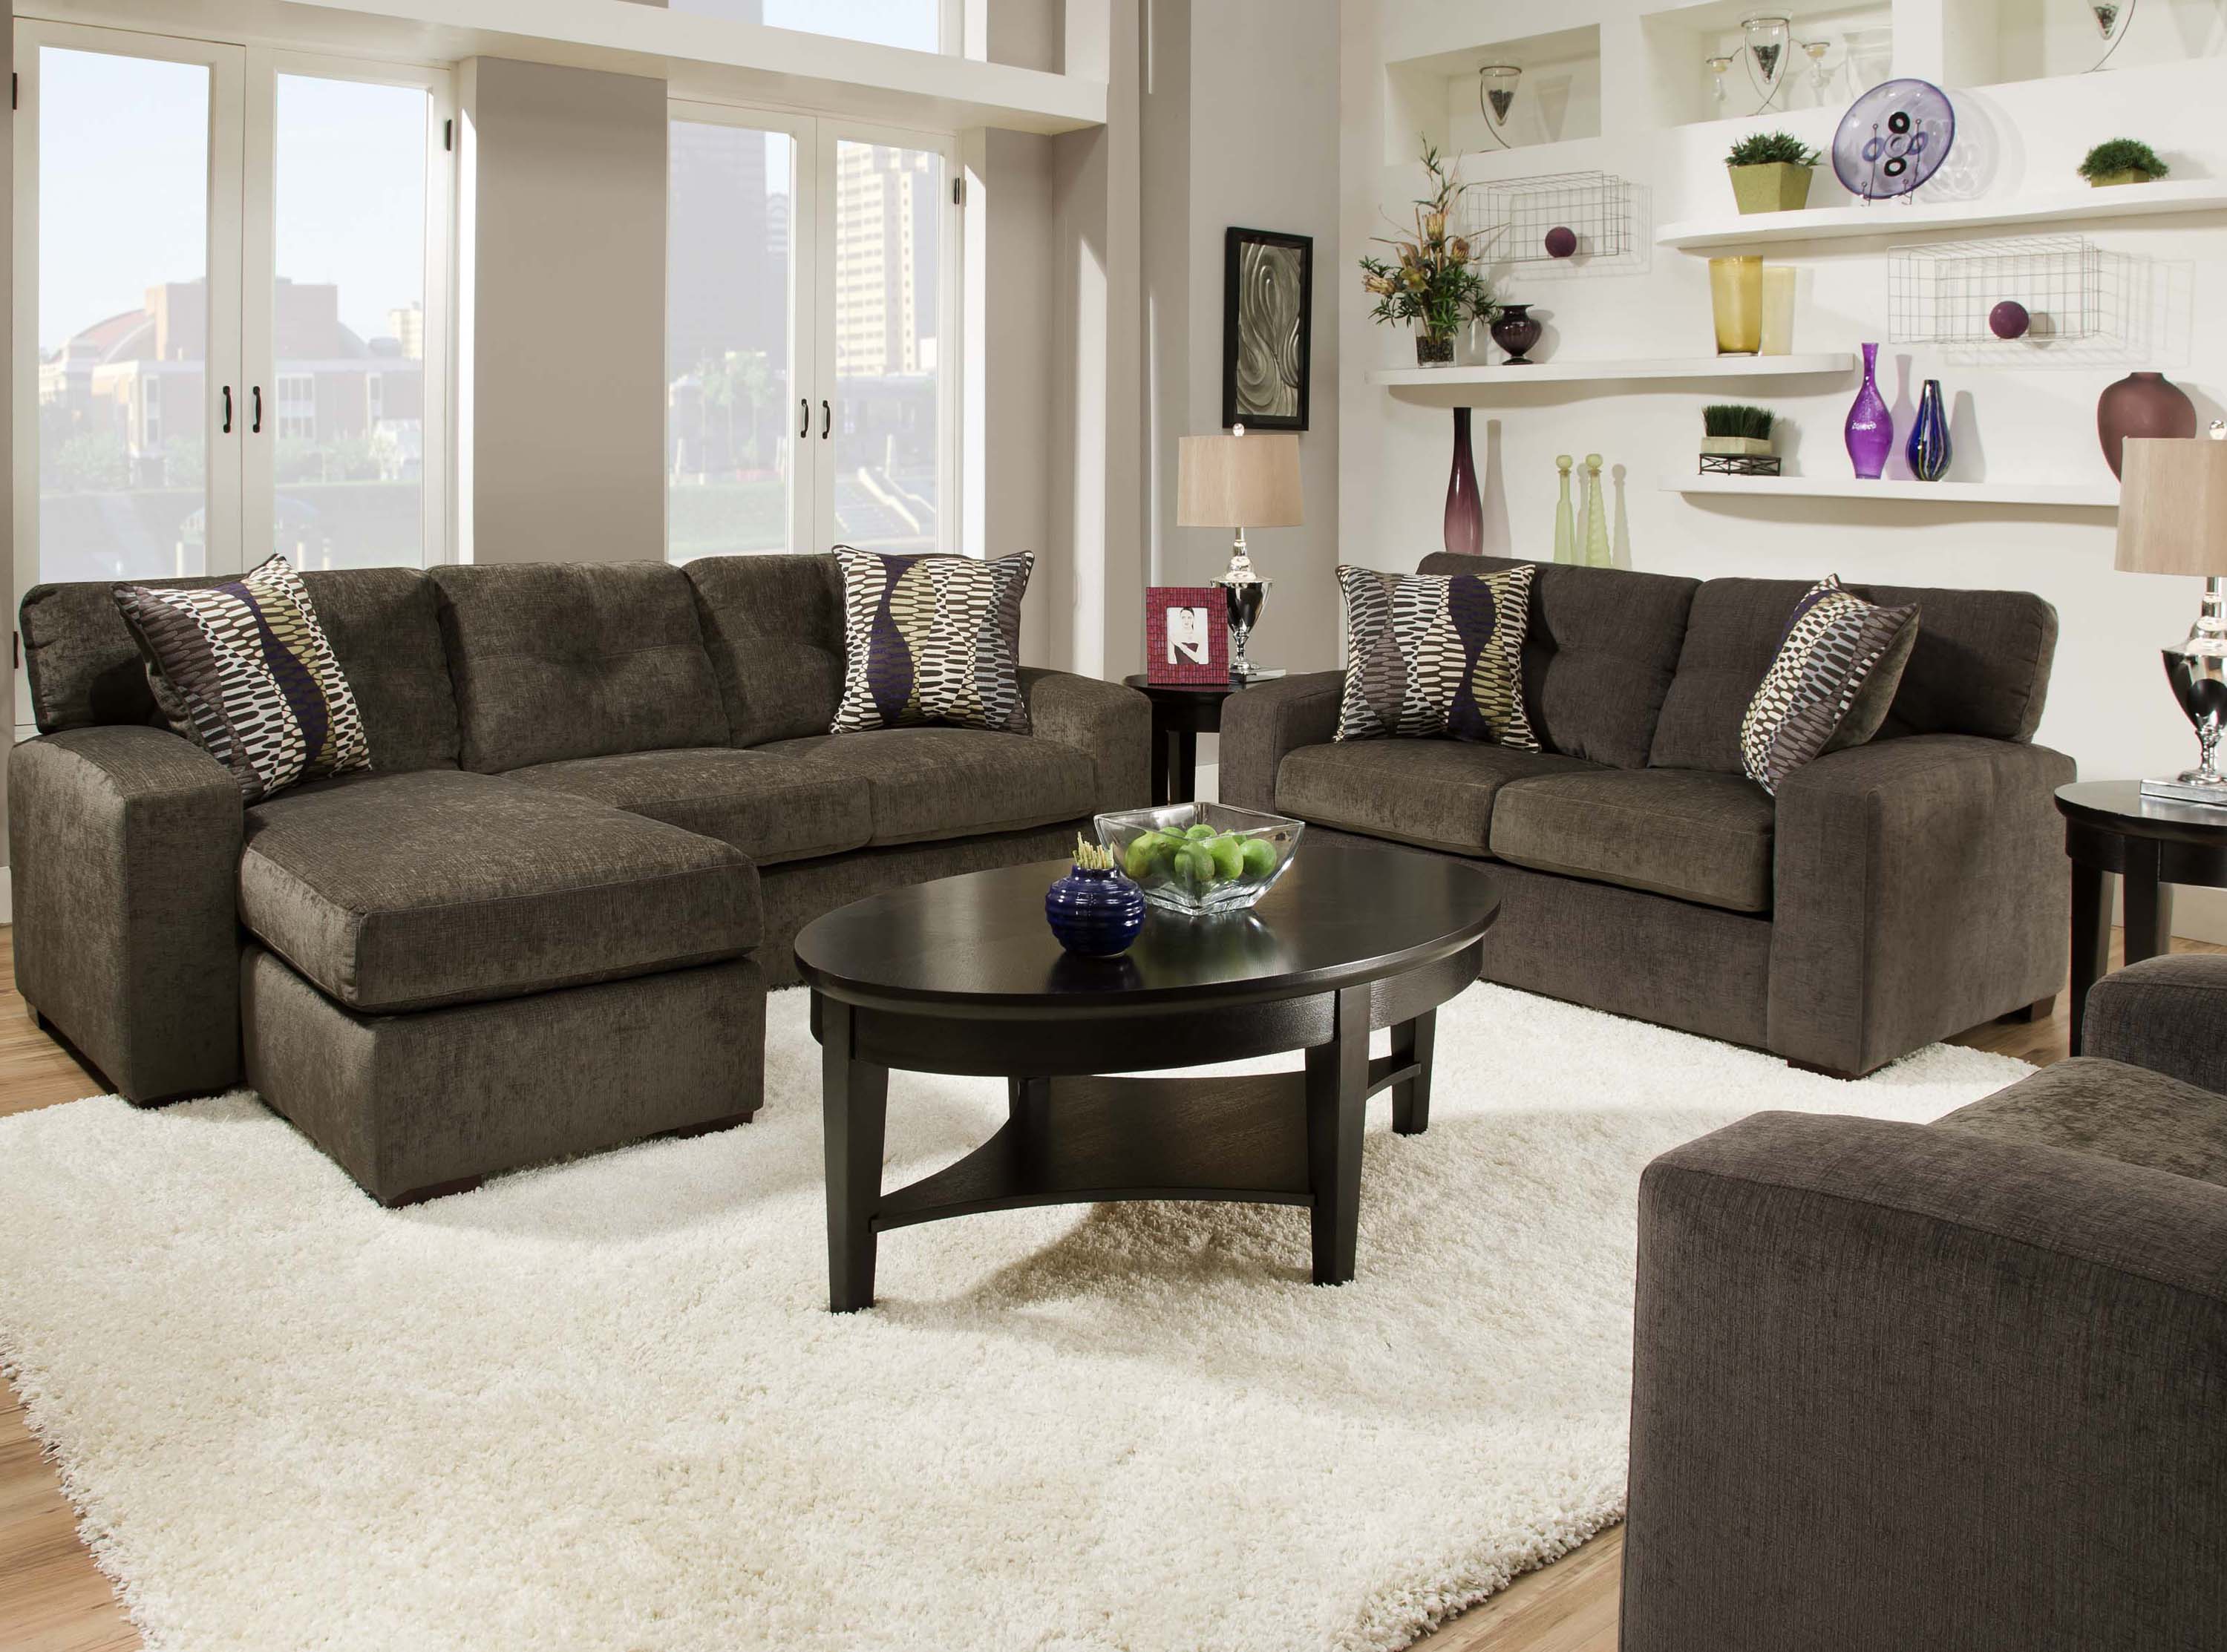 Classic Living With Interesting Classic Living Room Design With Dark Grey Colored Soft Contemporary Sofas And White Fur Carpet Placed On The Floor Decoration Remarkable Beautiful Contemporary Sofas With Various Elegant Styles